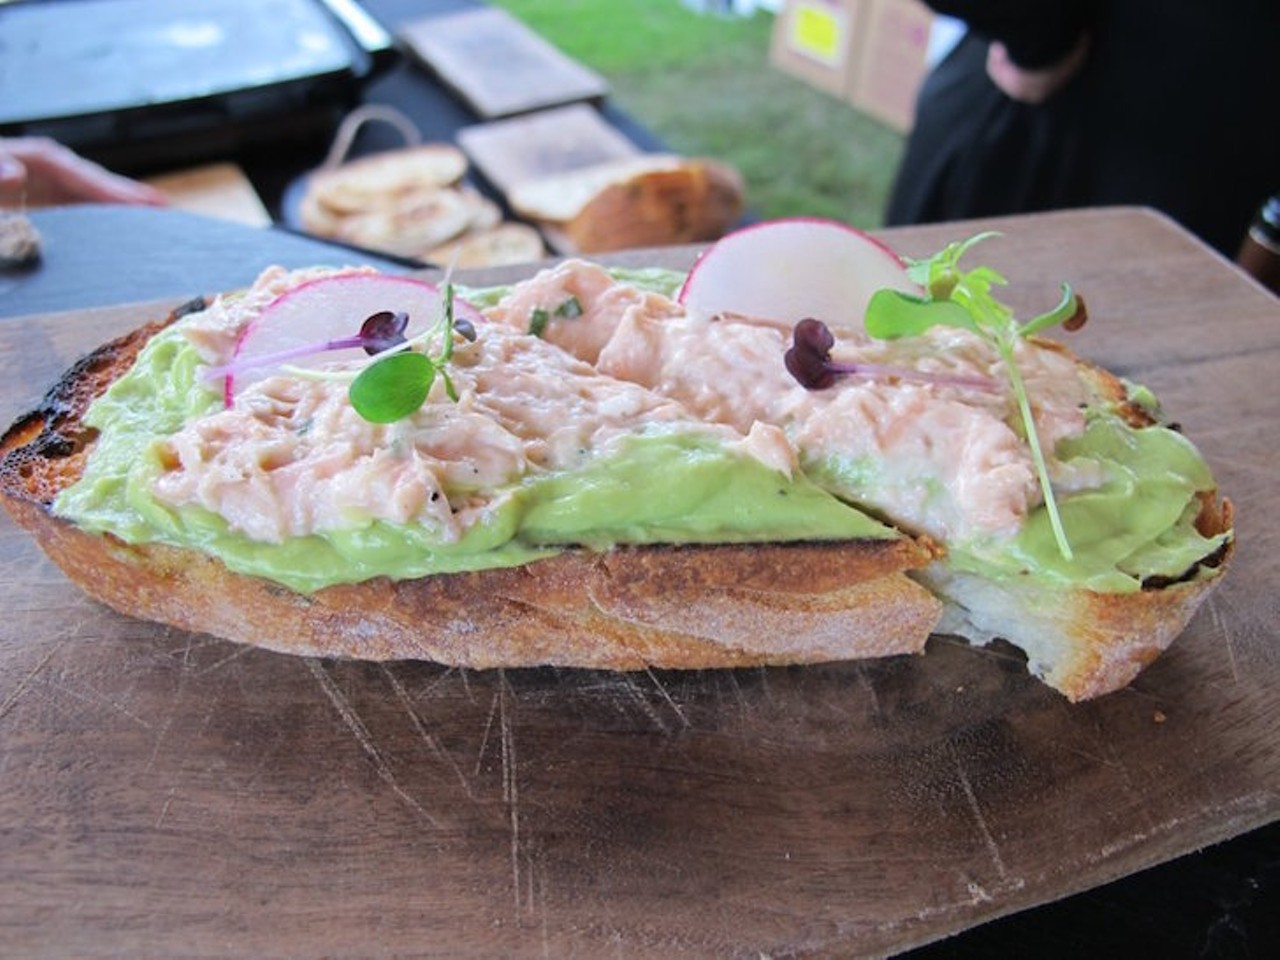 Salmon toast with avocado mousse on grilled potato-chive bread with pickled mustard seeds (Slate)